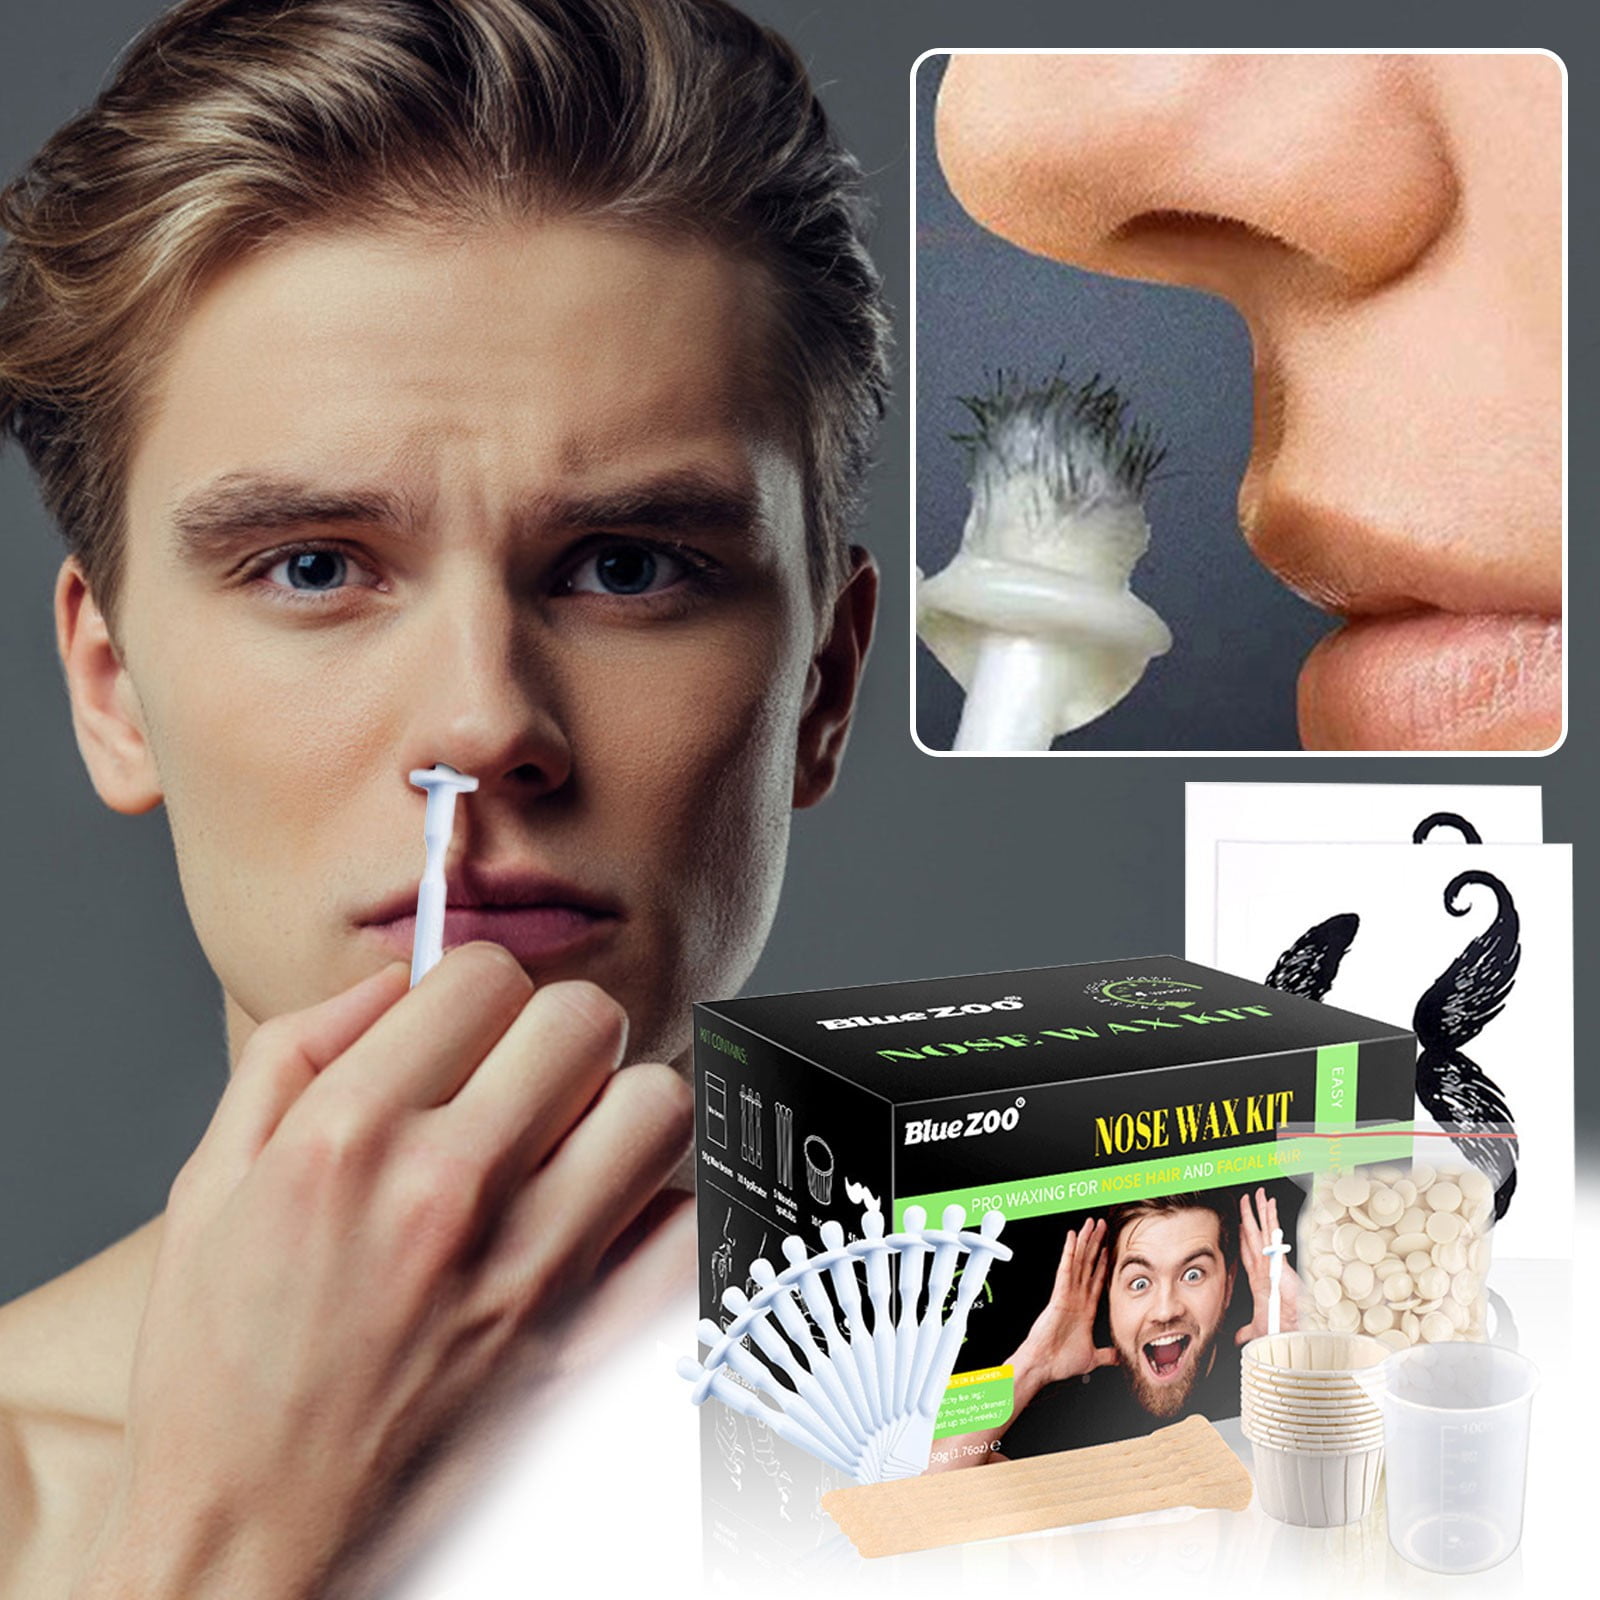 Nose Wax Kit, Wax Nose Hair Pulling Tool, Nostril Cleaning Paste, Nose ...